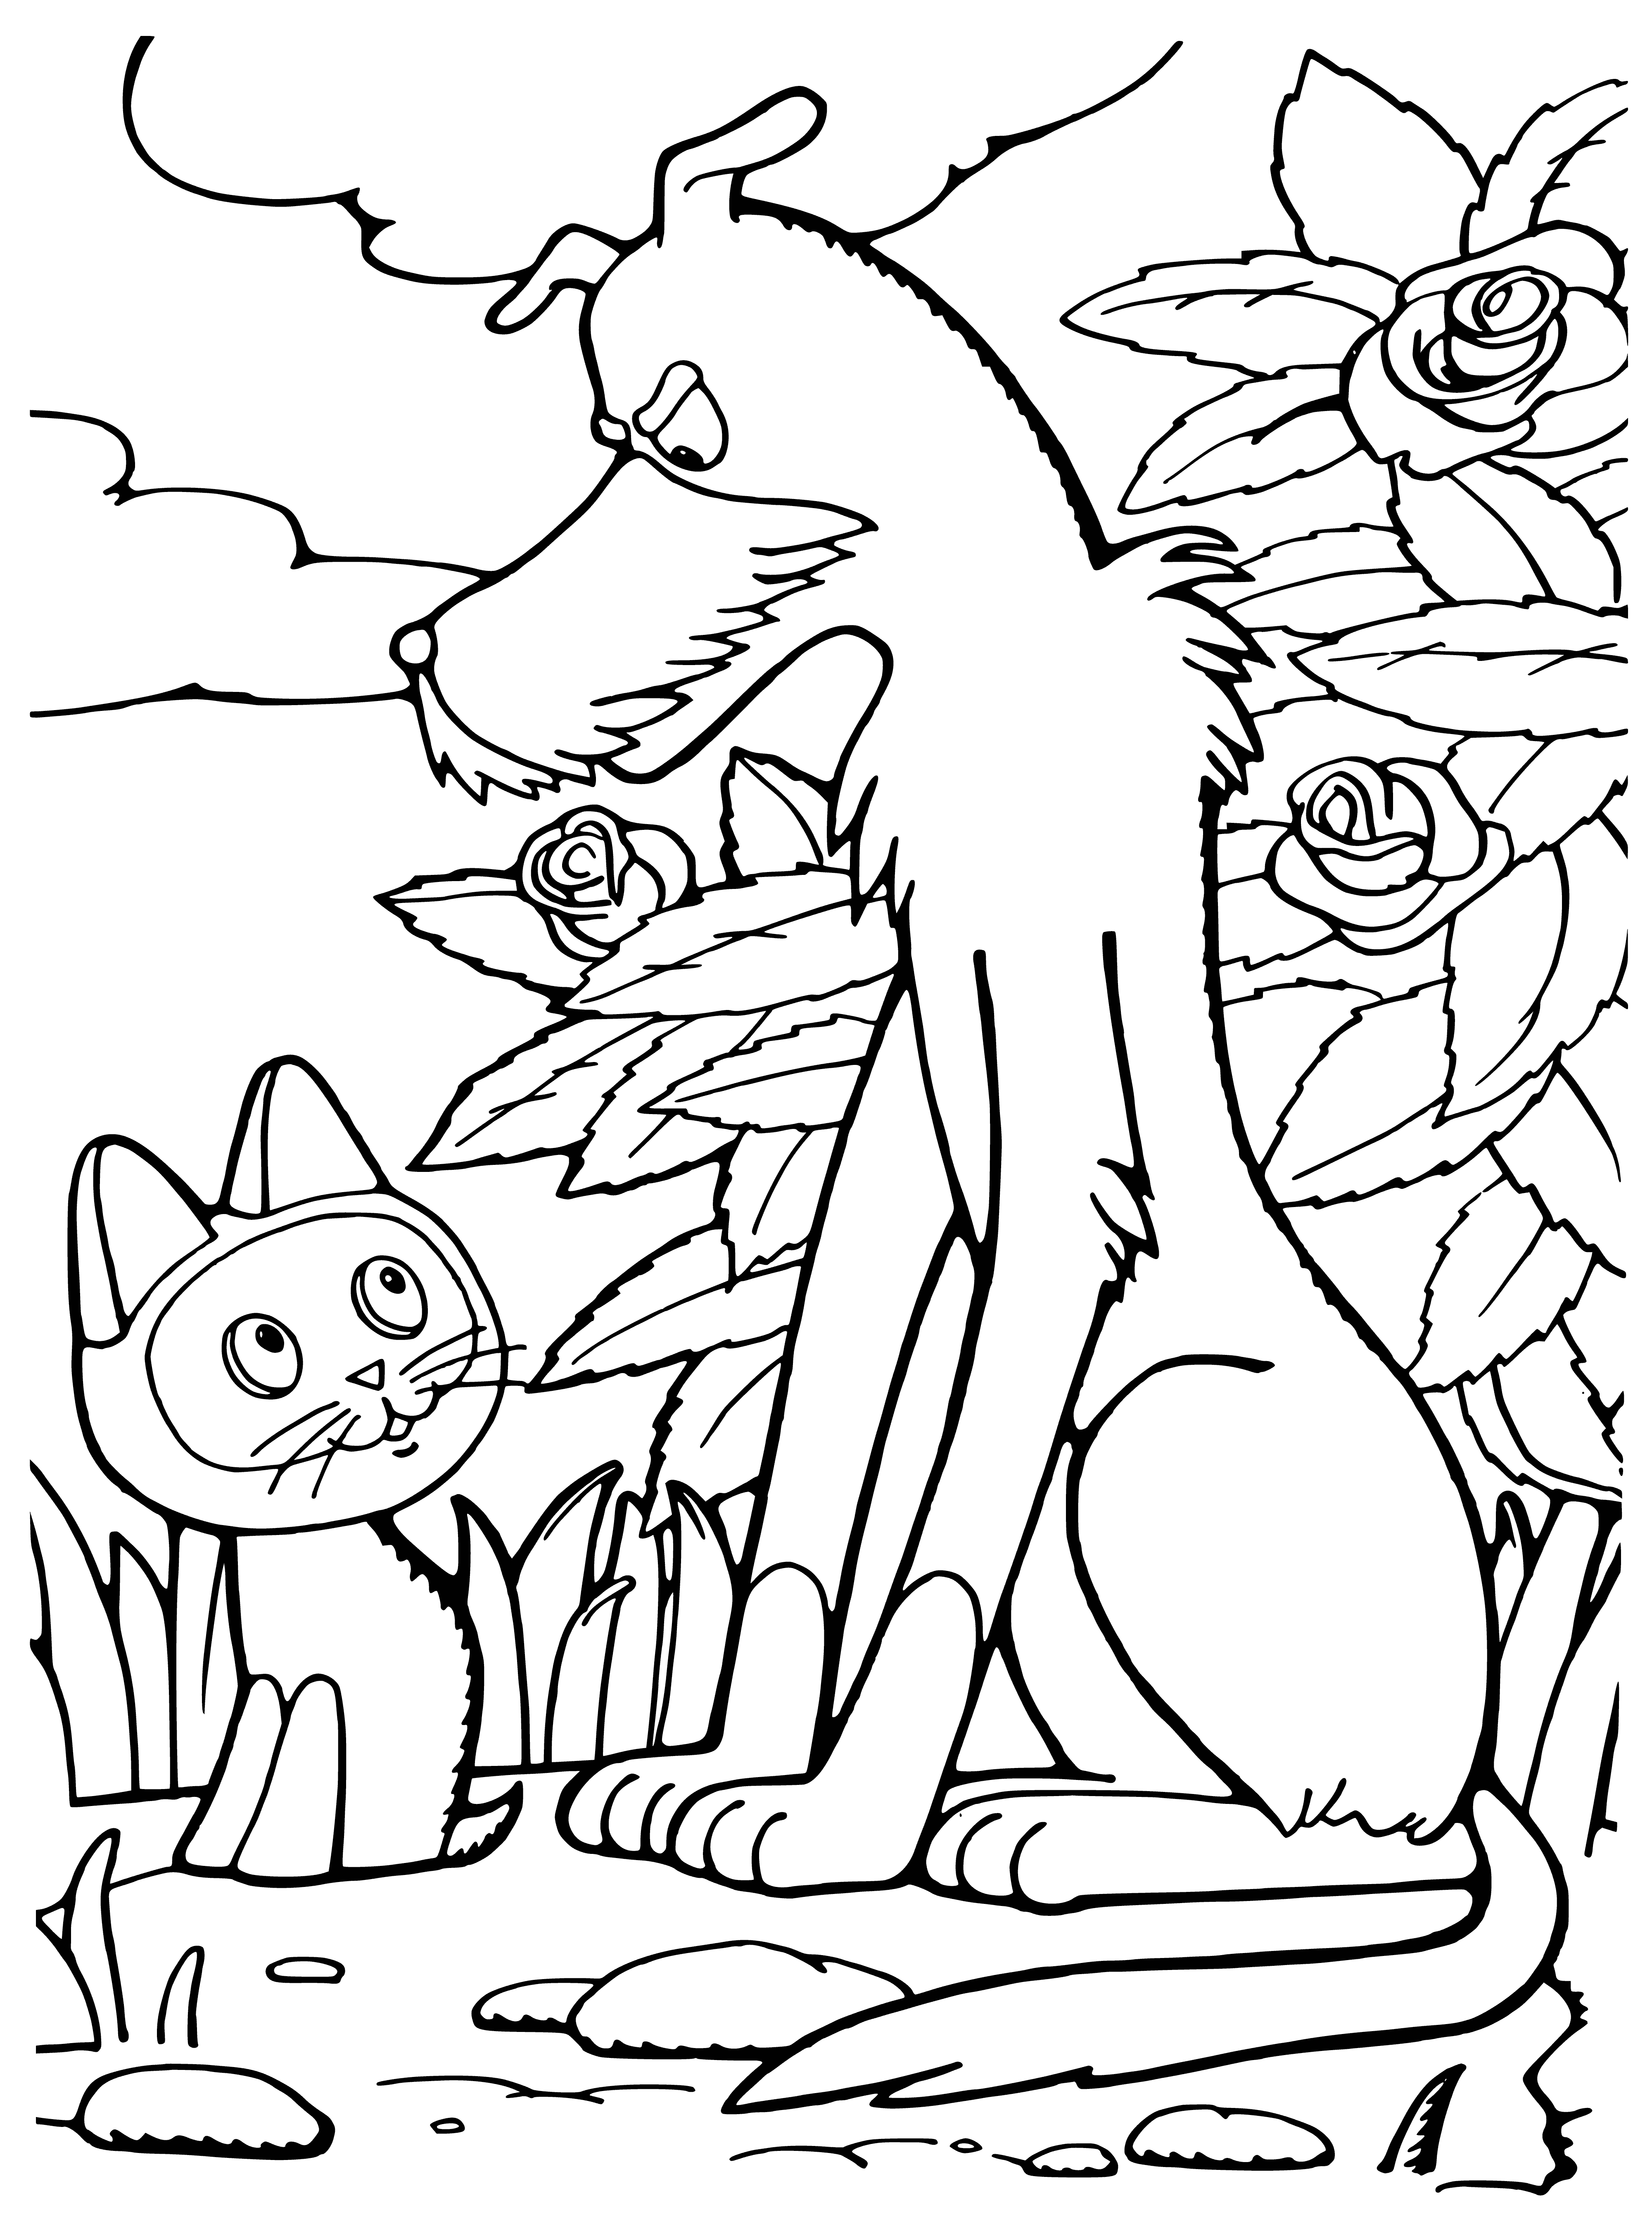 coloring page: Kitten in coloring page is gray/white, pointy ears, looking at camera.